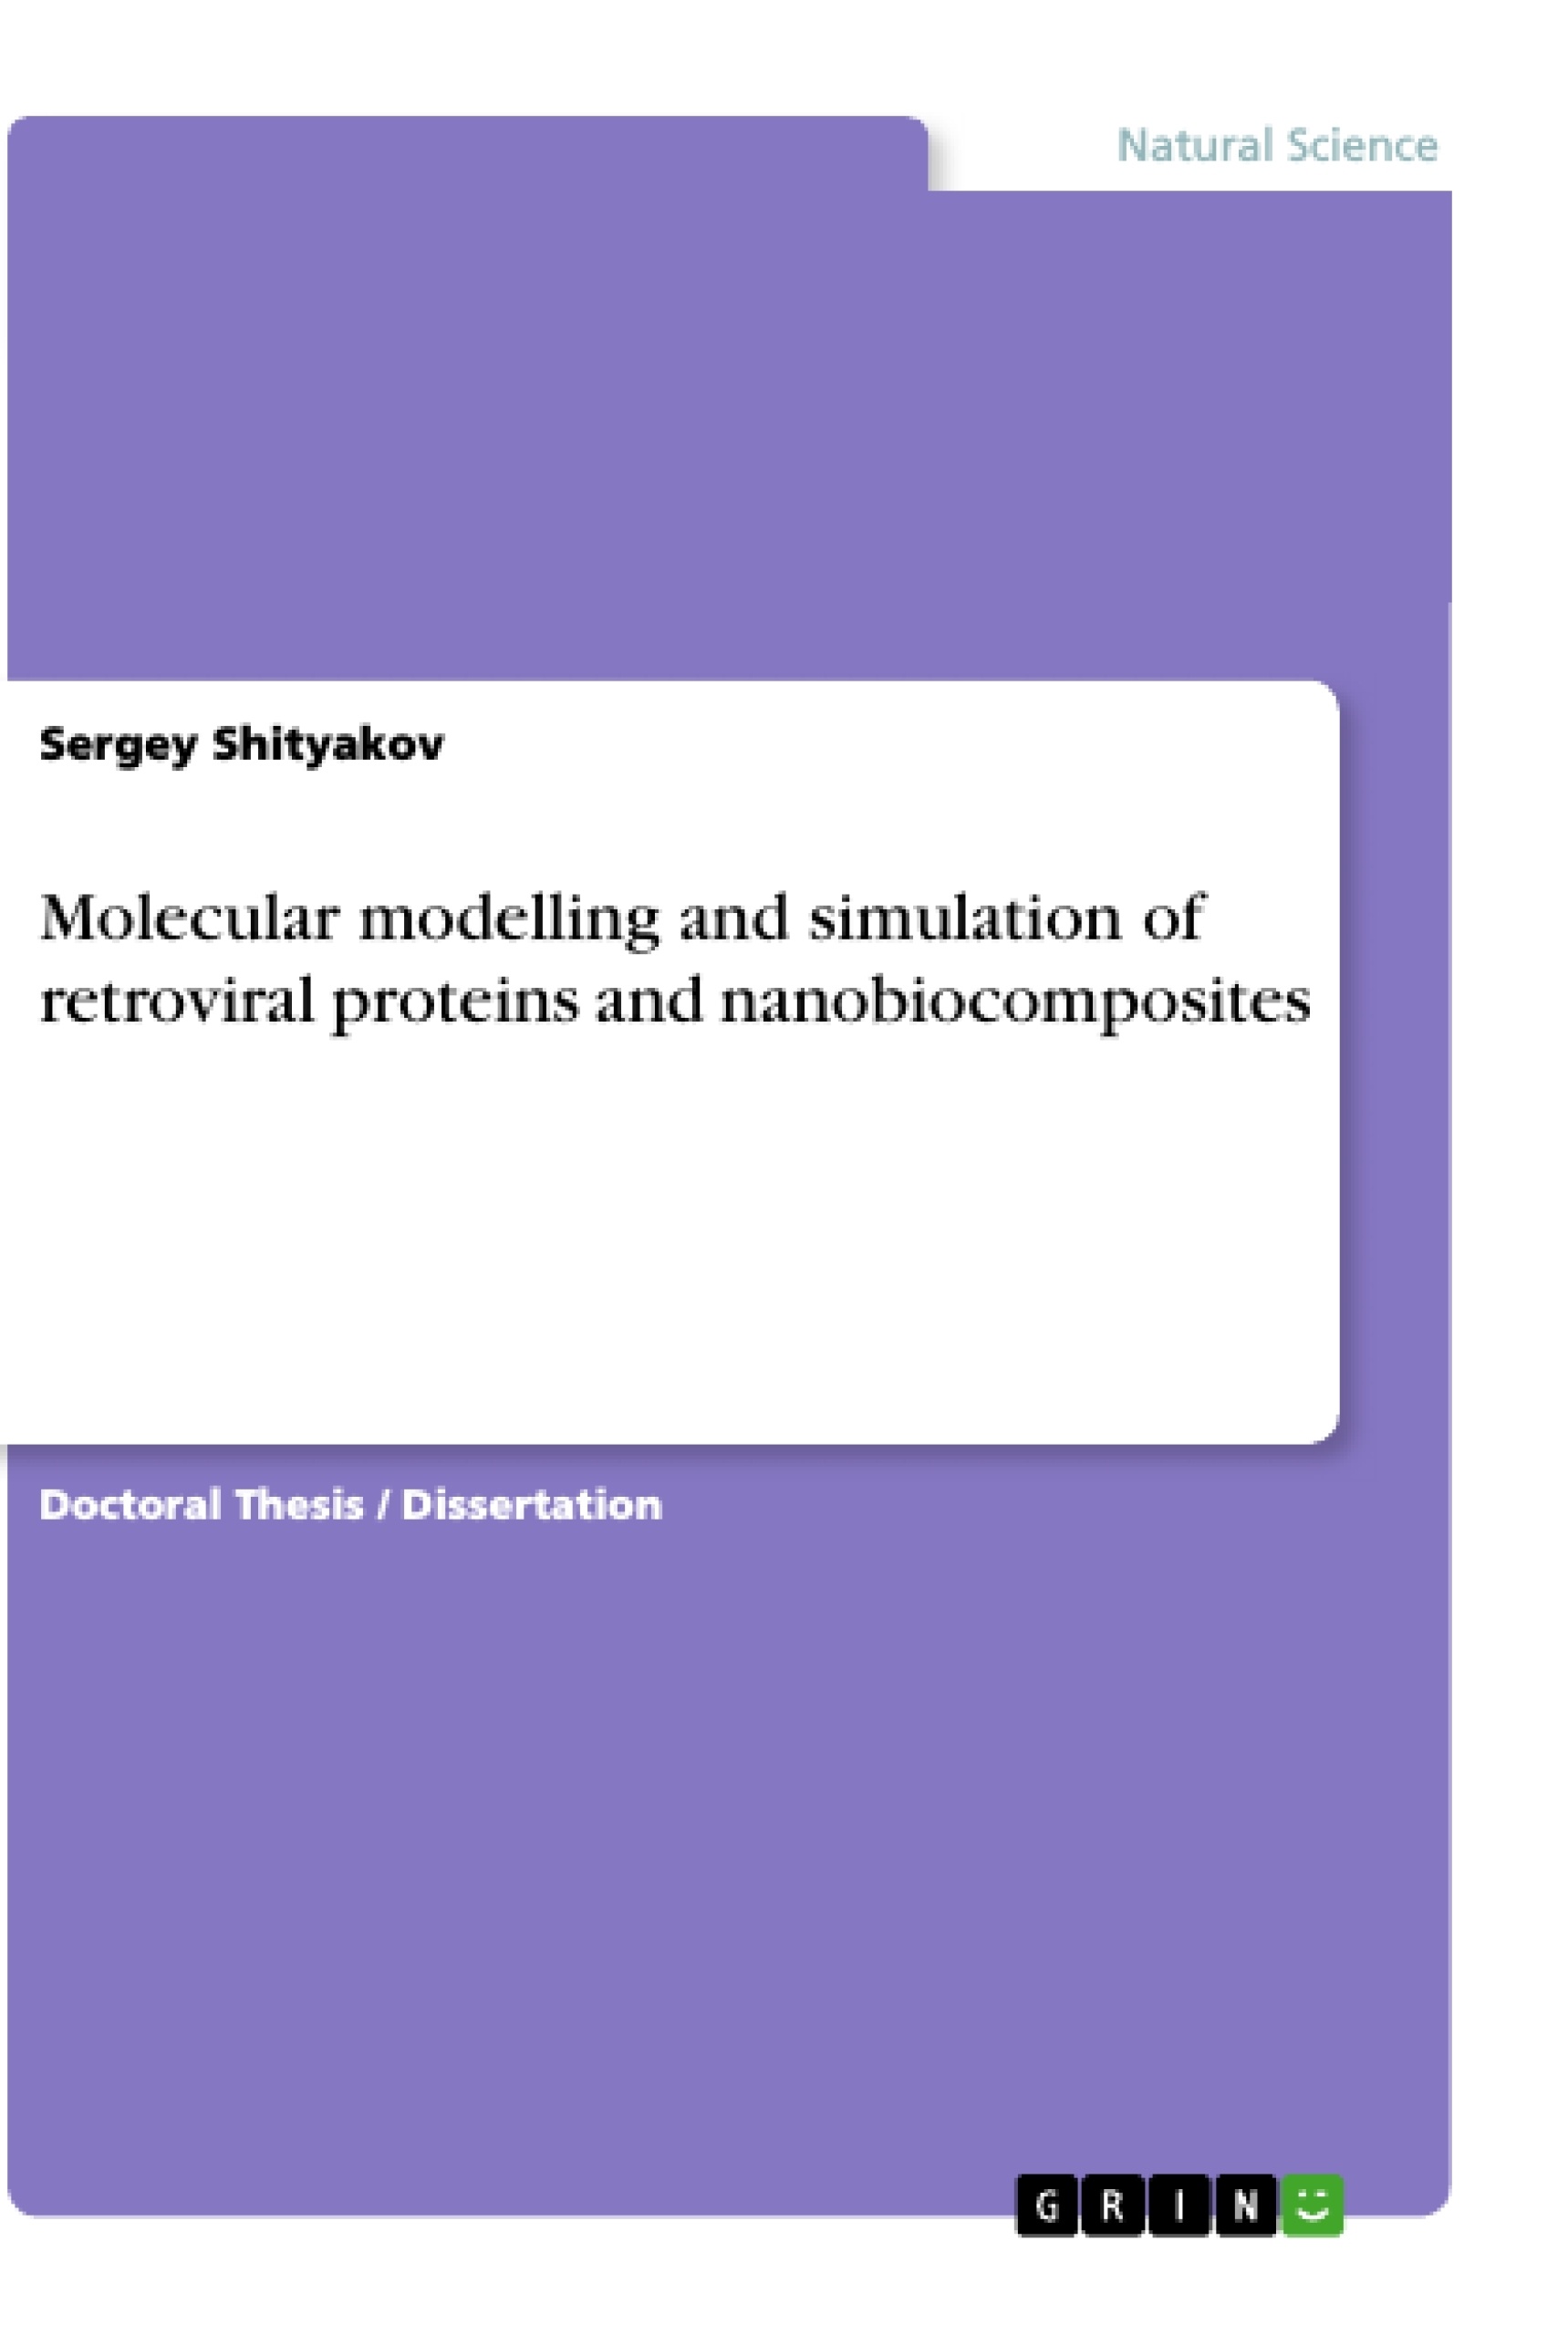 Título: Molecular modelling and simulation of retroviral proteins and nanobiocomposites